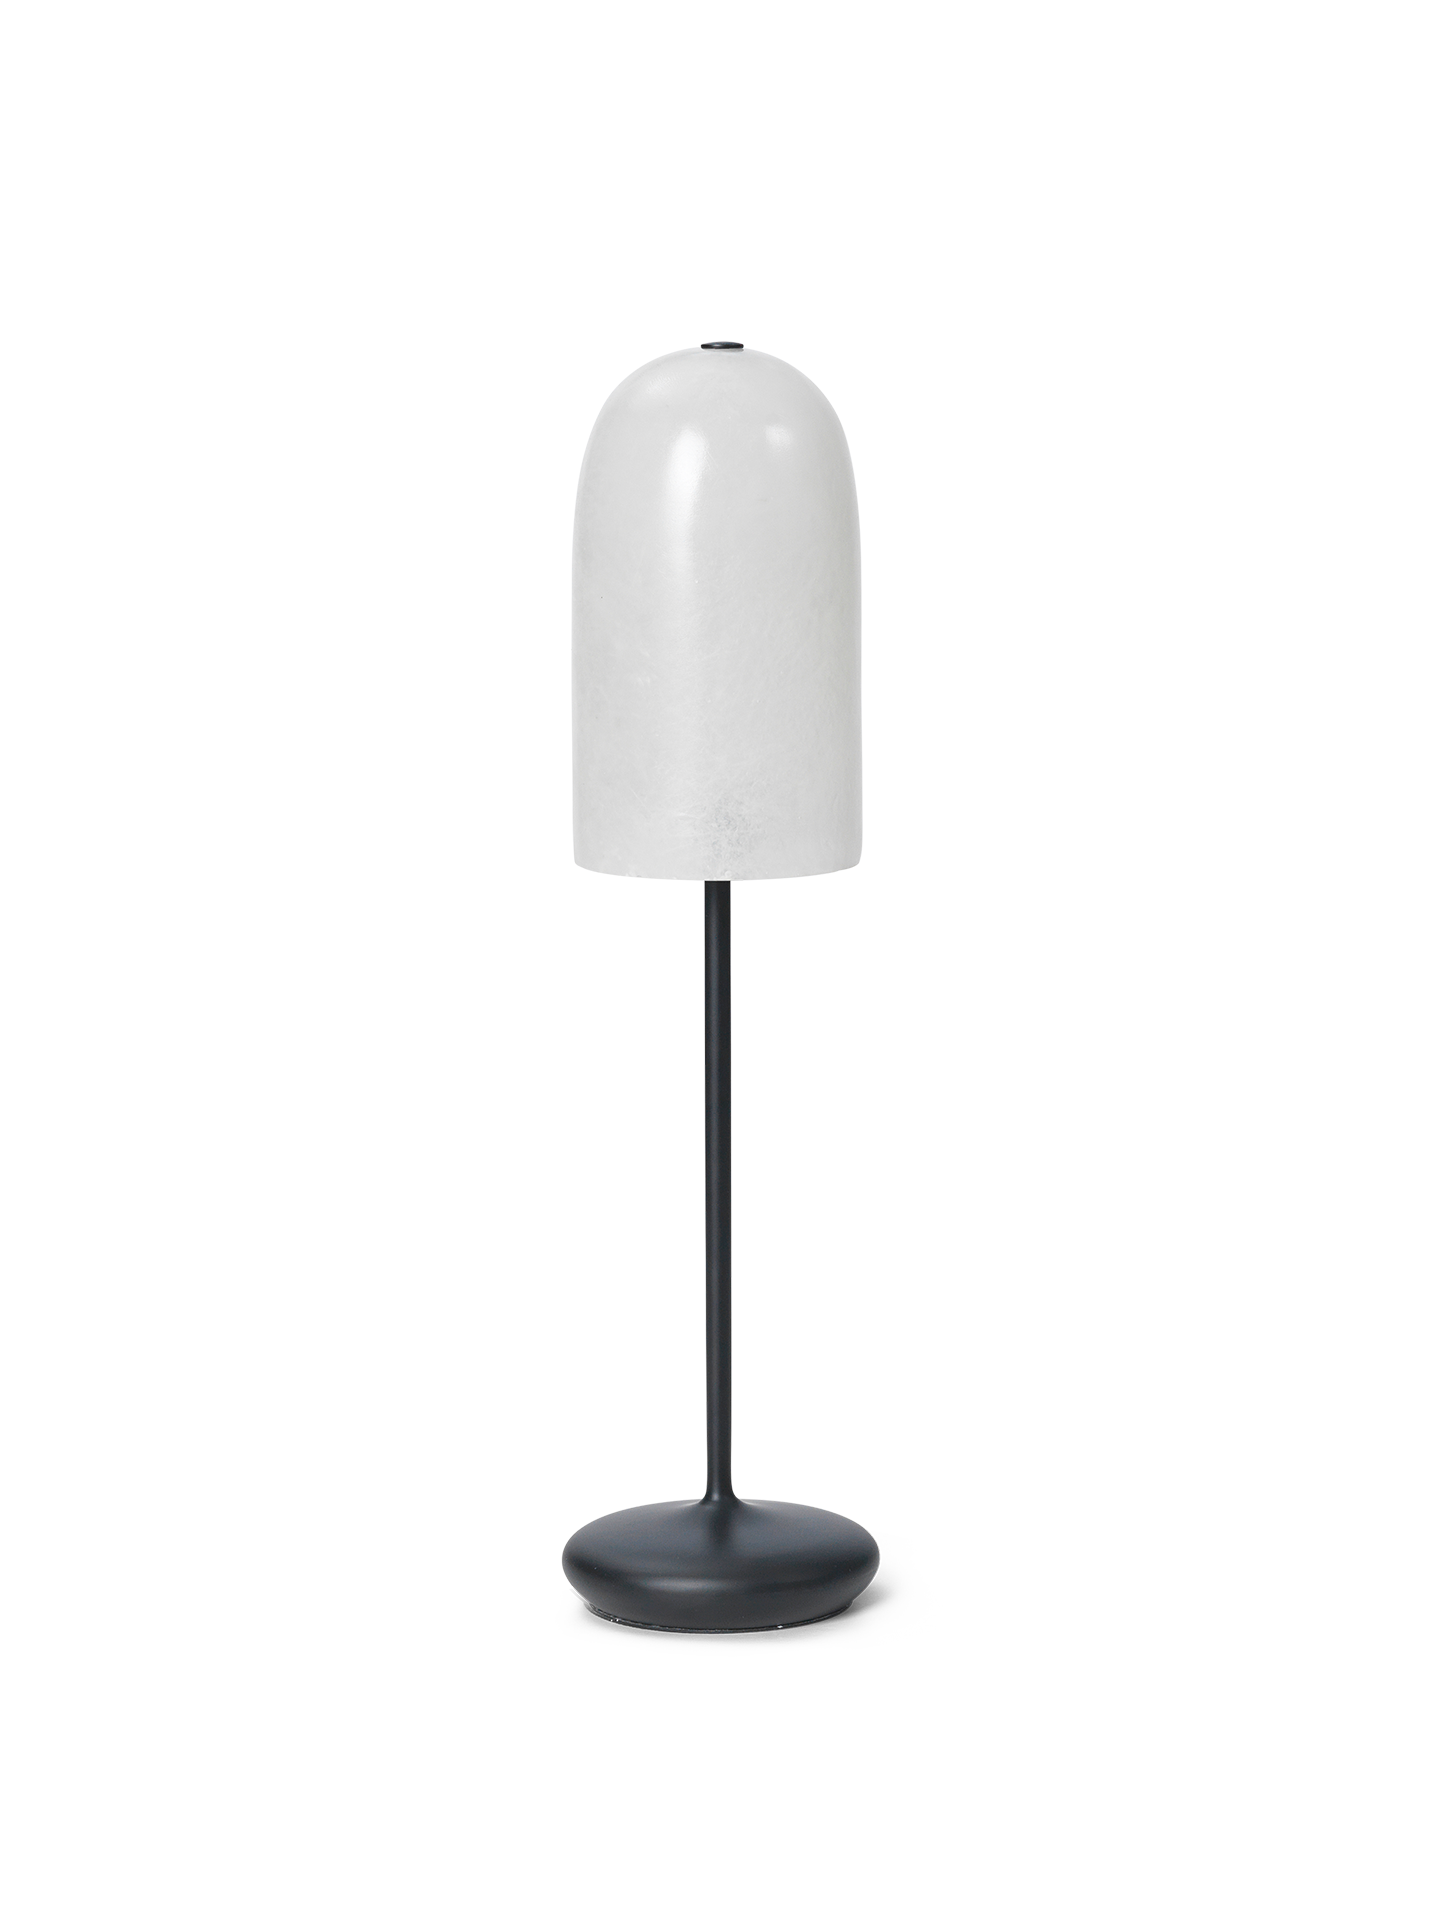 Gry Table Lamp - Black/Translucent